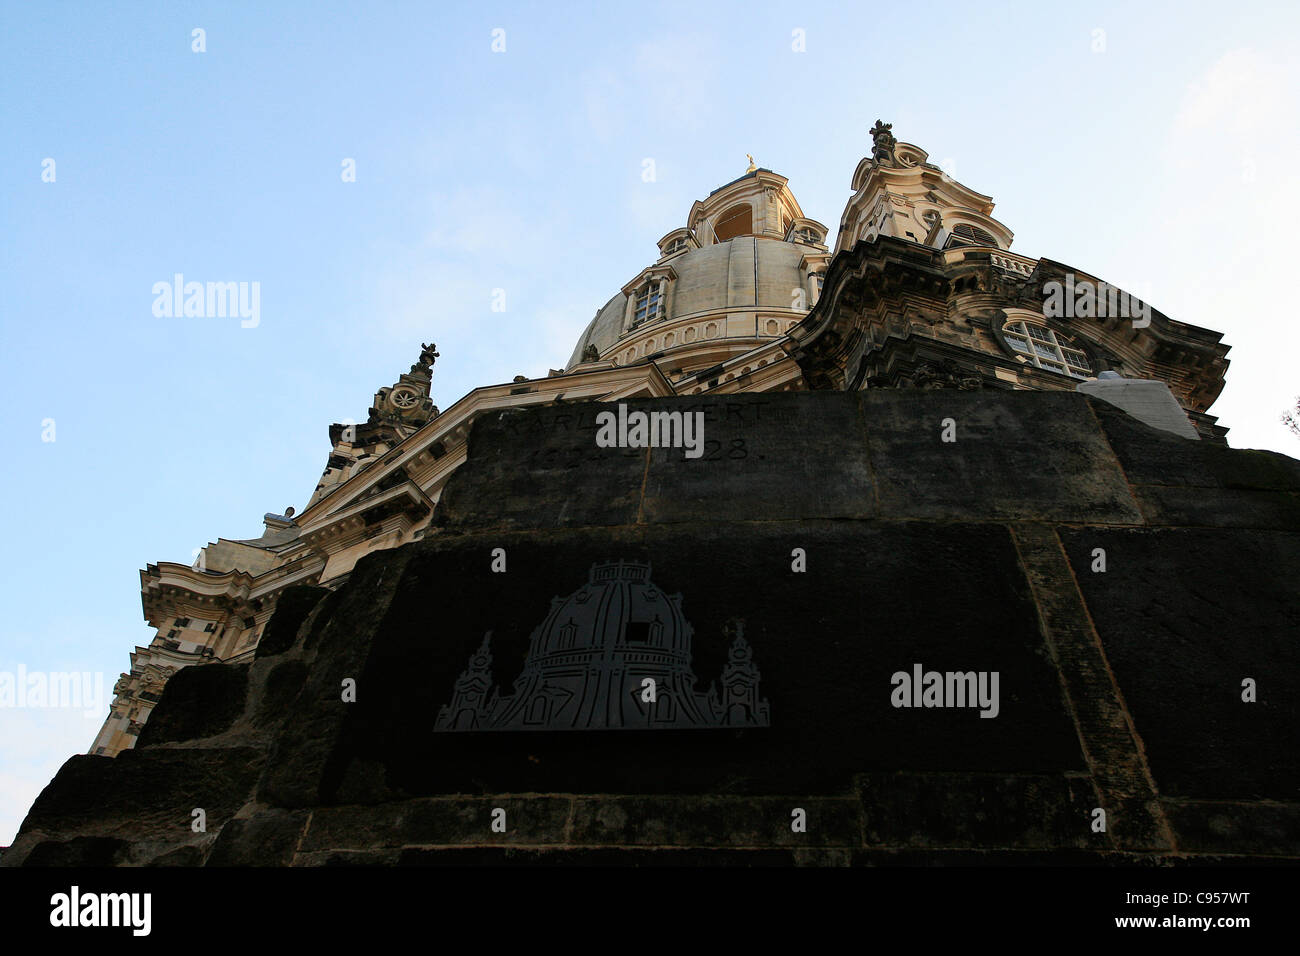 The Frauenkirche ( Church of Our Lady ) with memorial in Dresden, Germany. Stock Photo